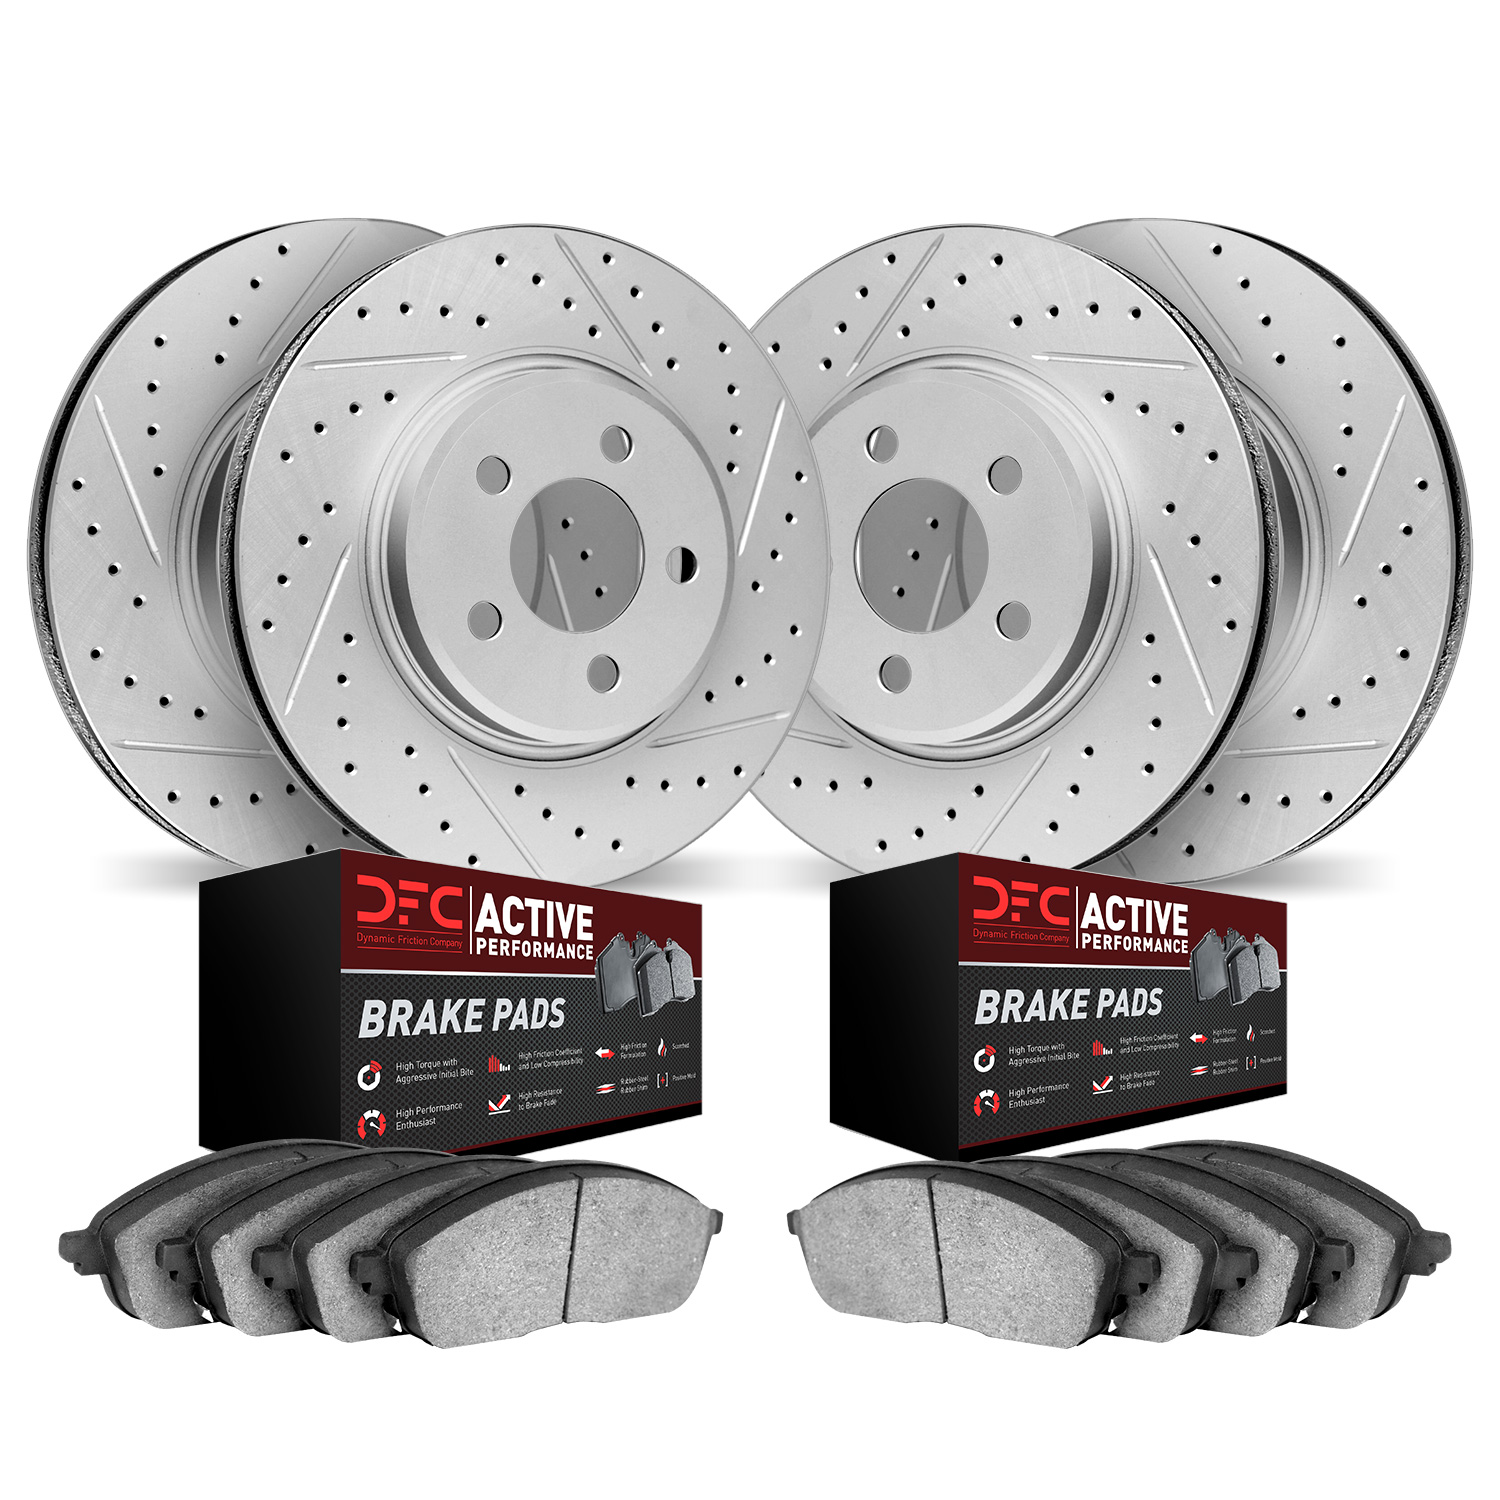 2704-31050 Geoperformance Drilled/Slotted Brake Rotors with Active Performance Pads Kit, 2006-2006 BMW, Position: Front and Rear